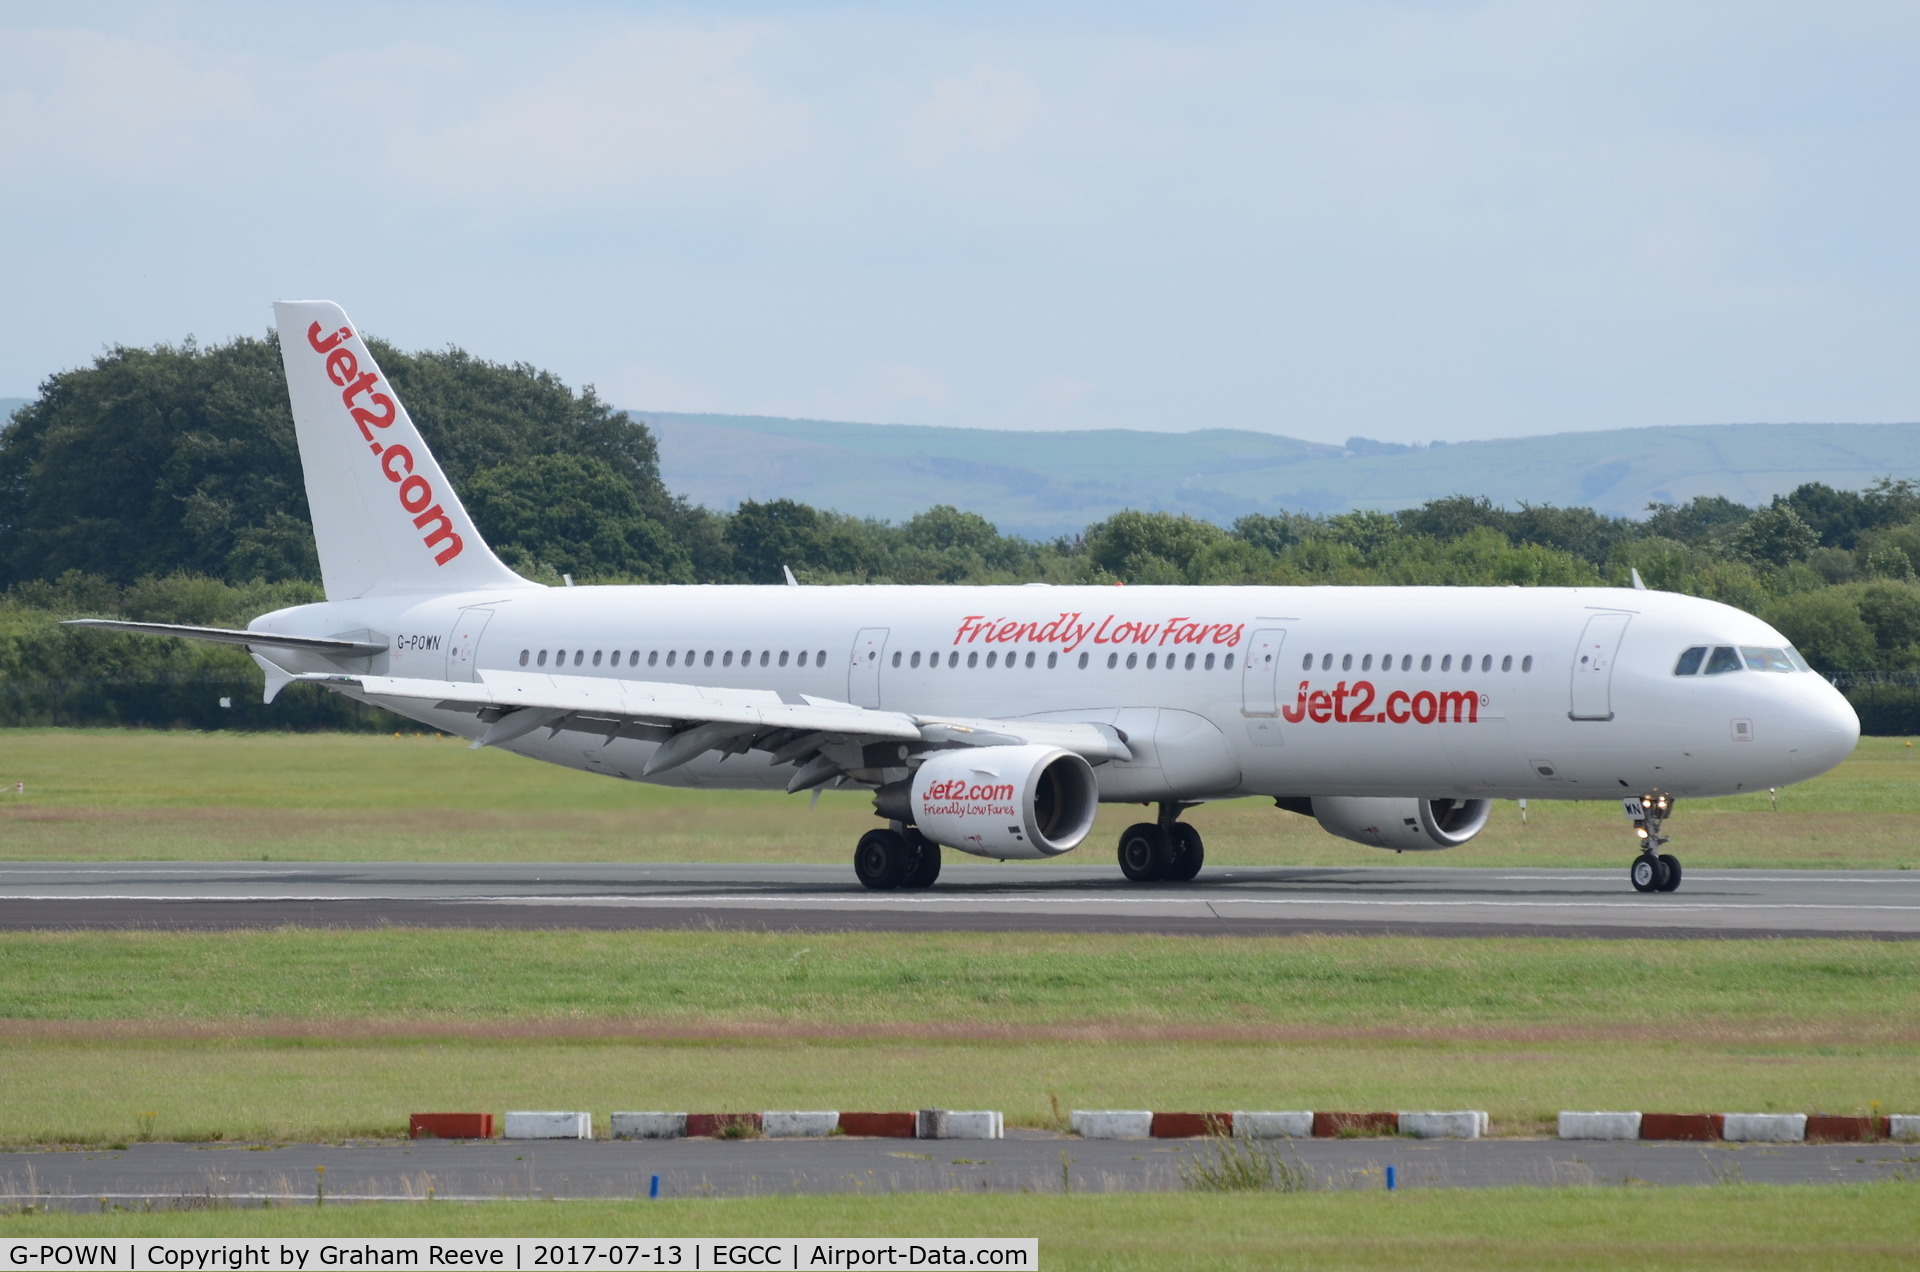 G-POWN, 2009 Airbus A321-211 C/N 3830, Just landed at Manchester.